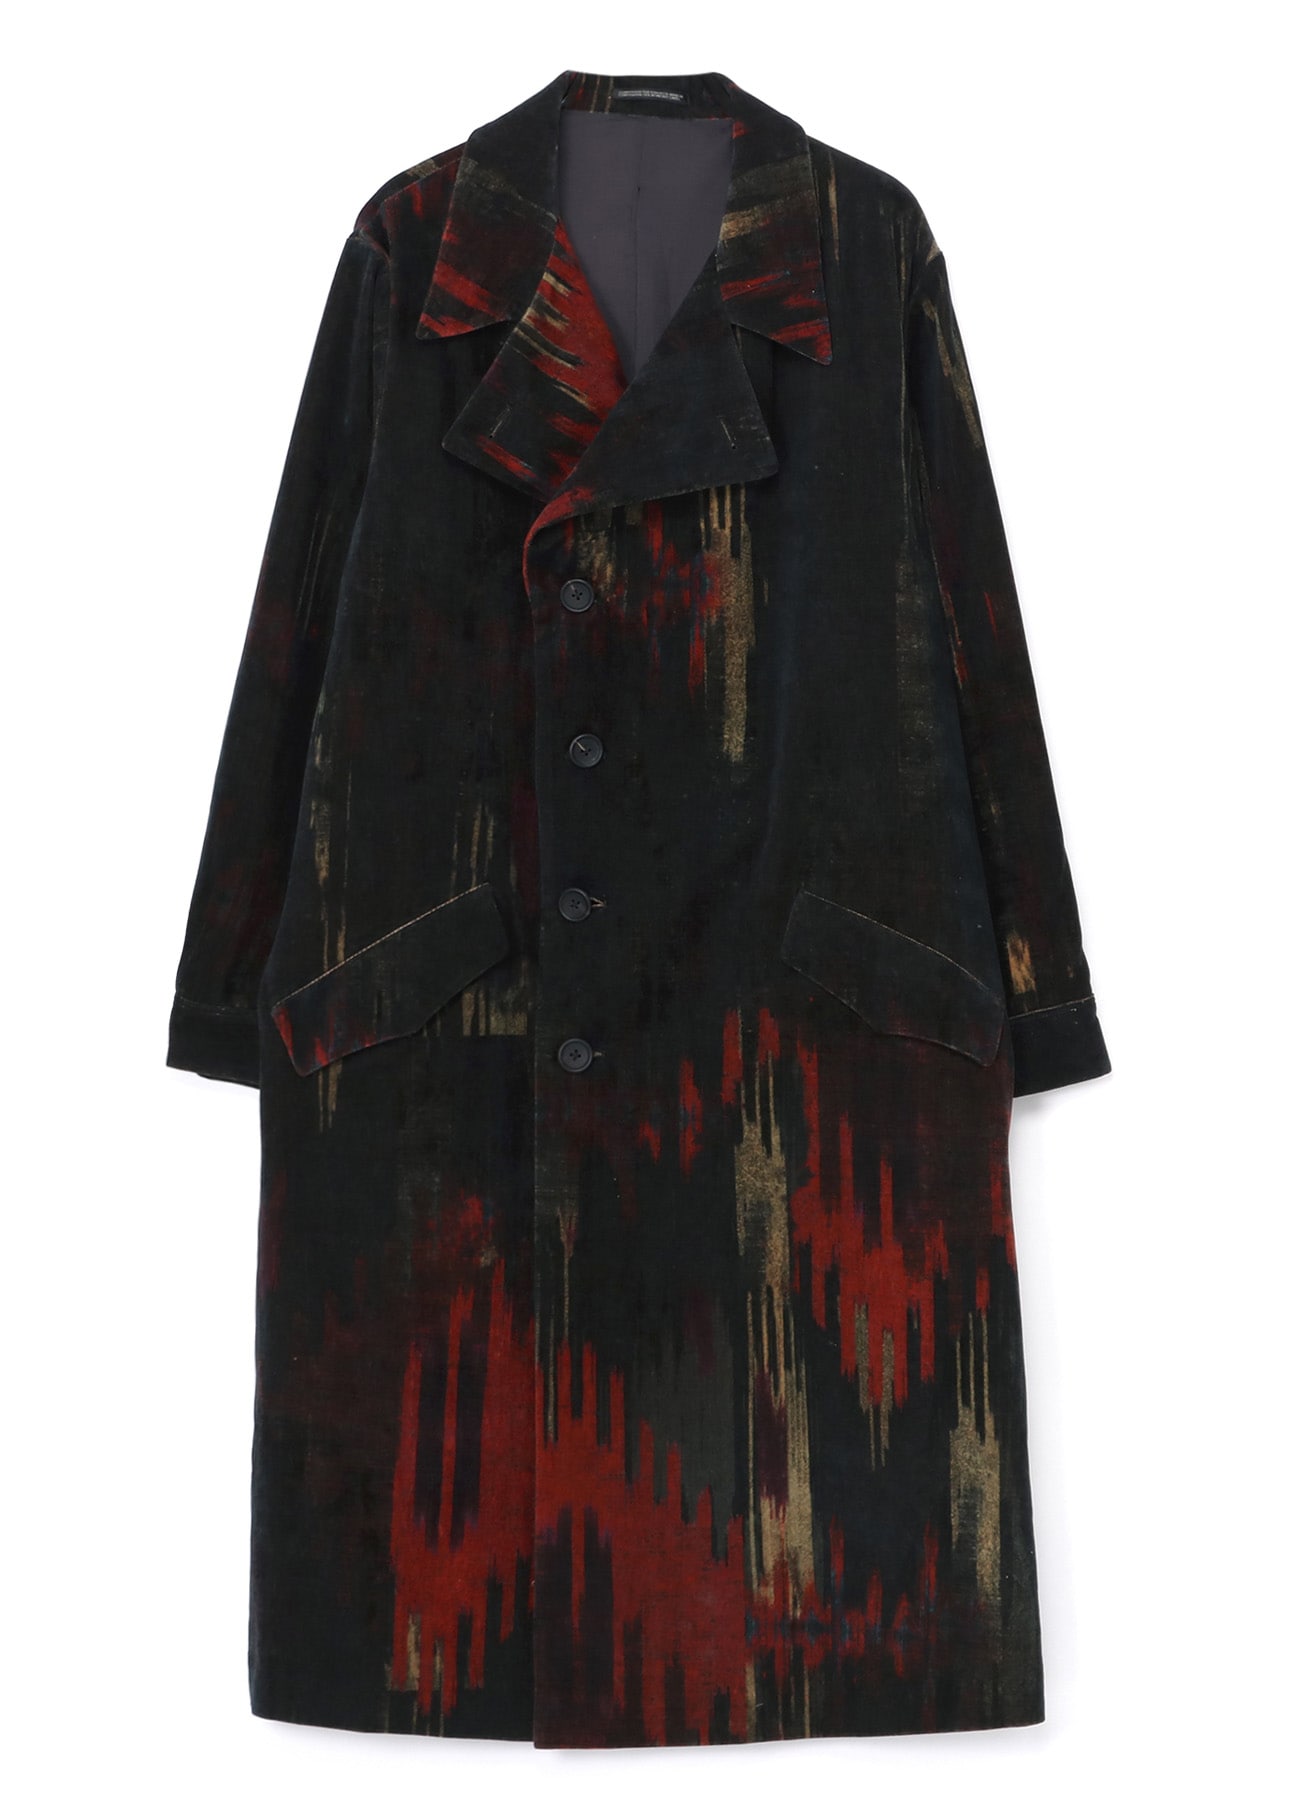 BLACK, RED AND GREEN ABSTRACT PRINT COAT